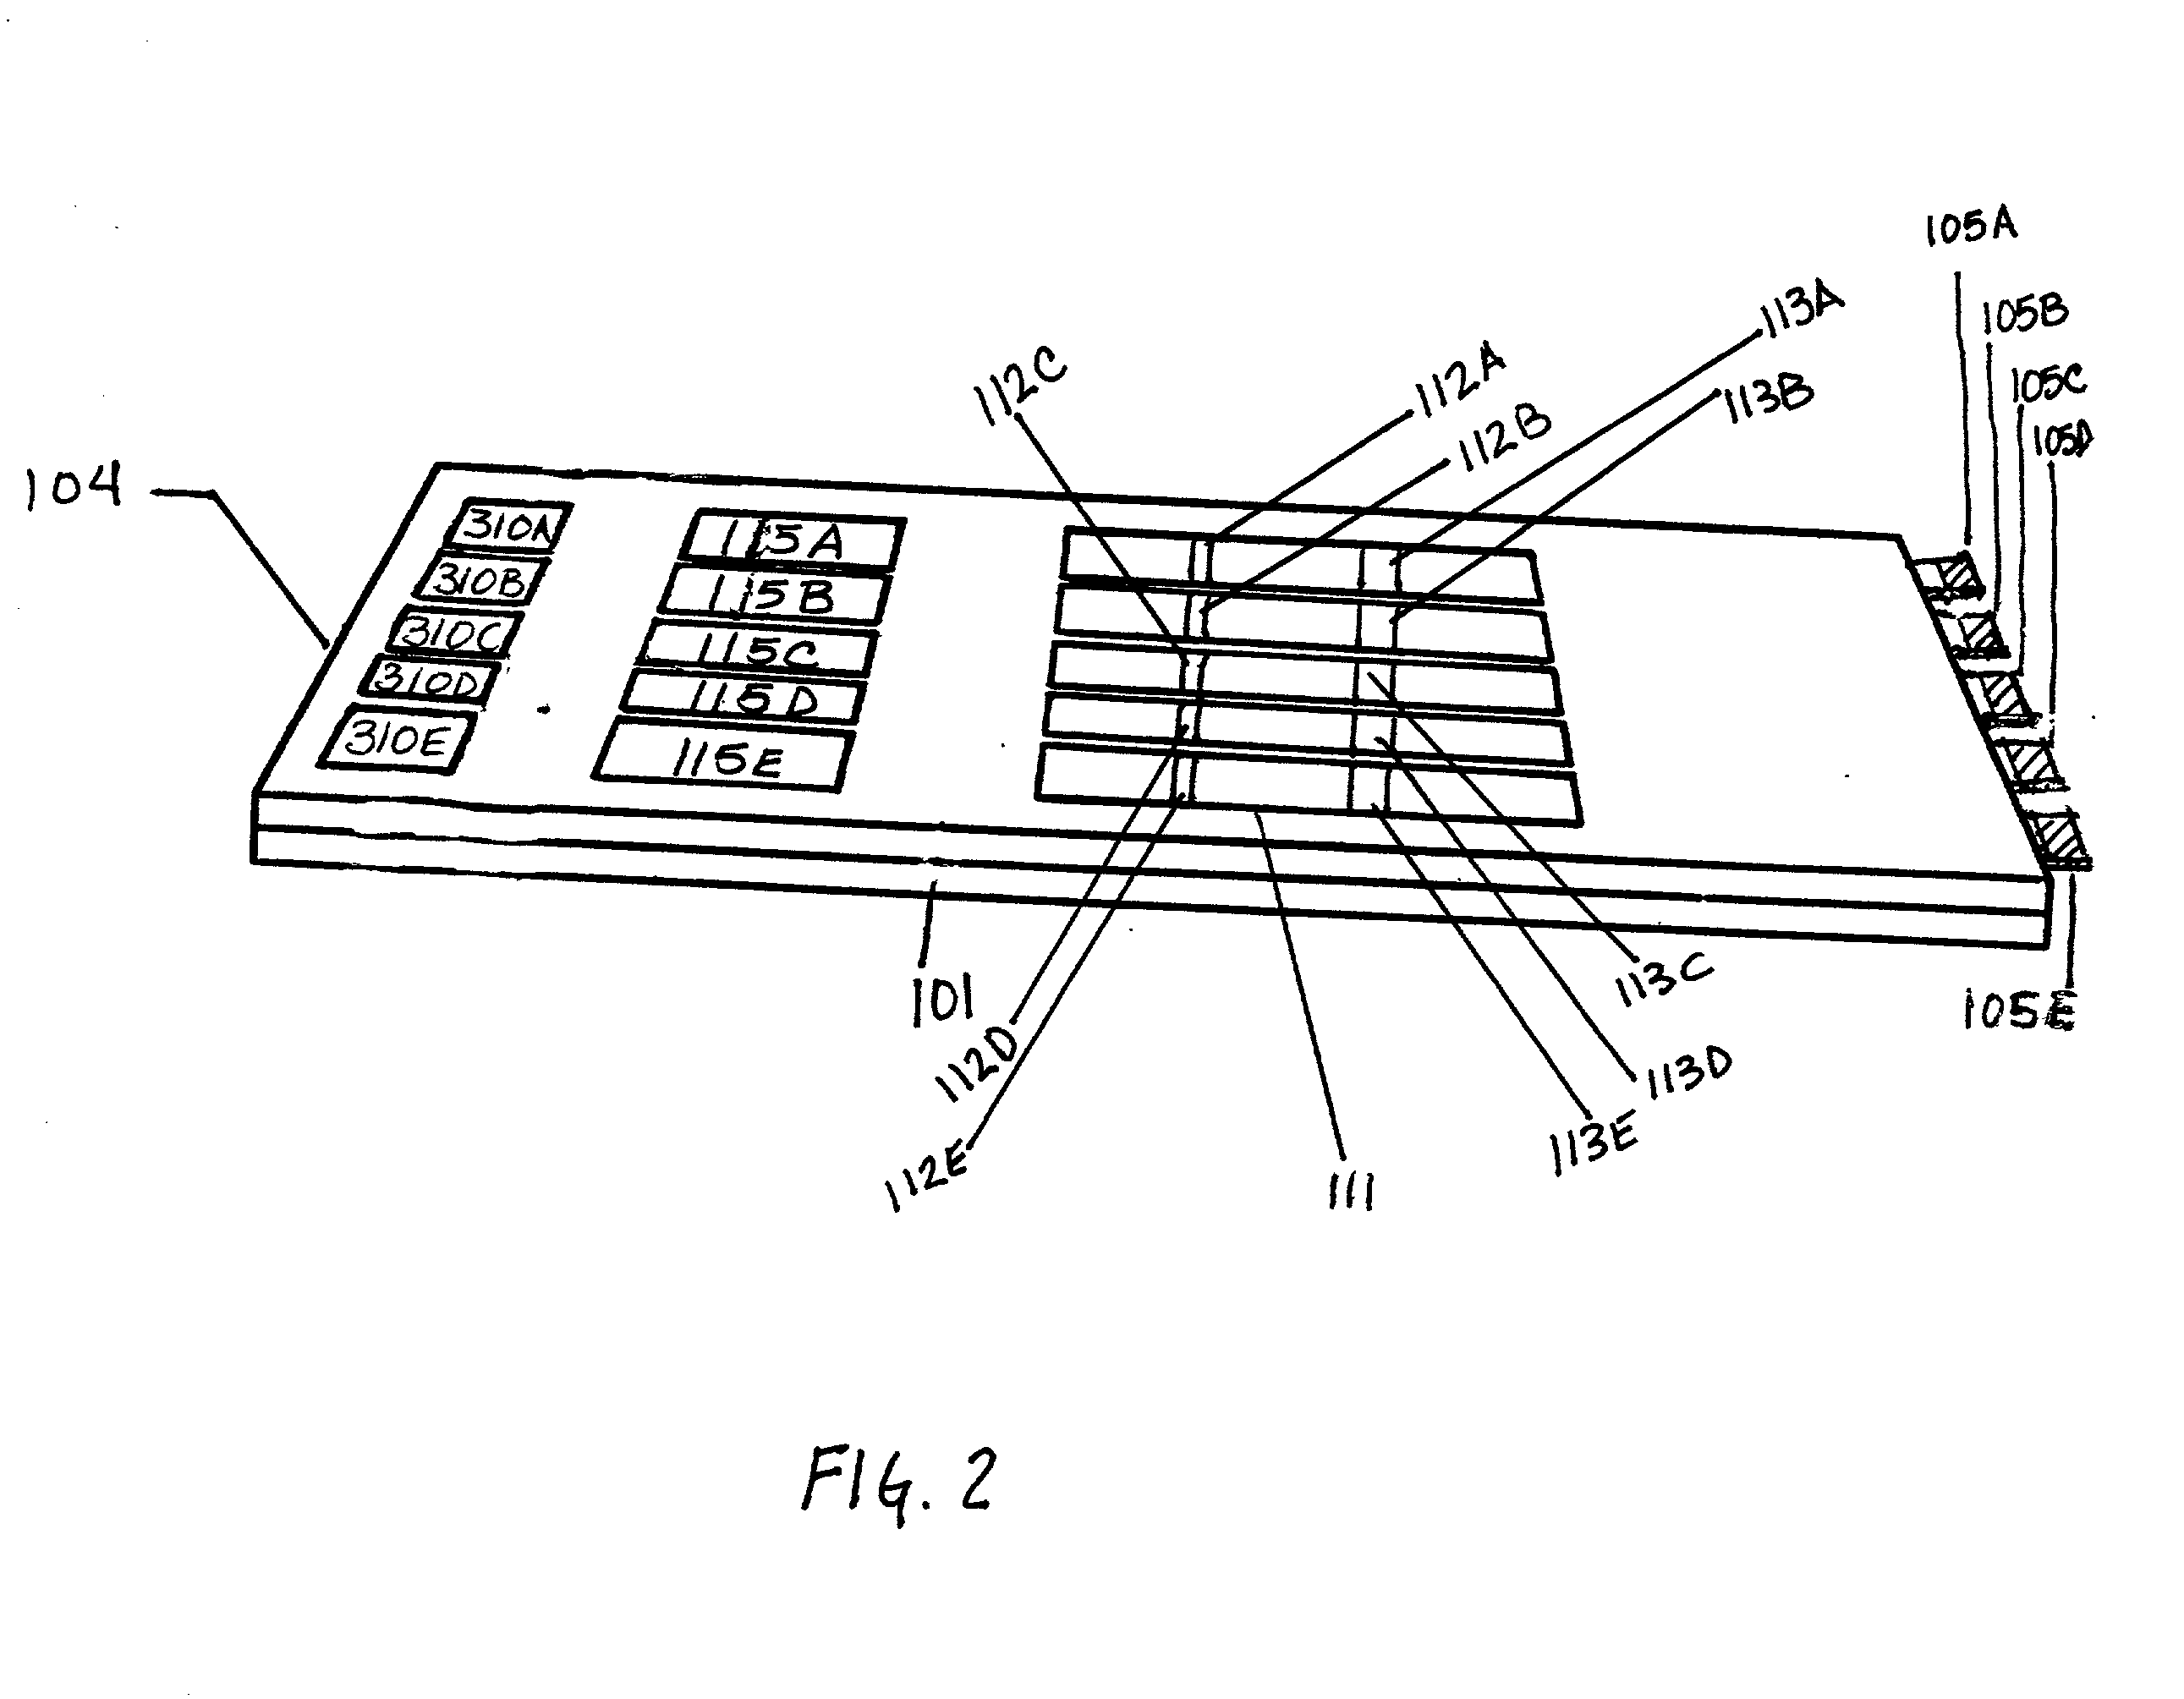 Multiple analyte assay device with sample integrity monitoring system